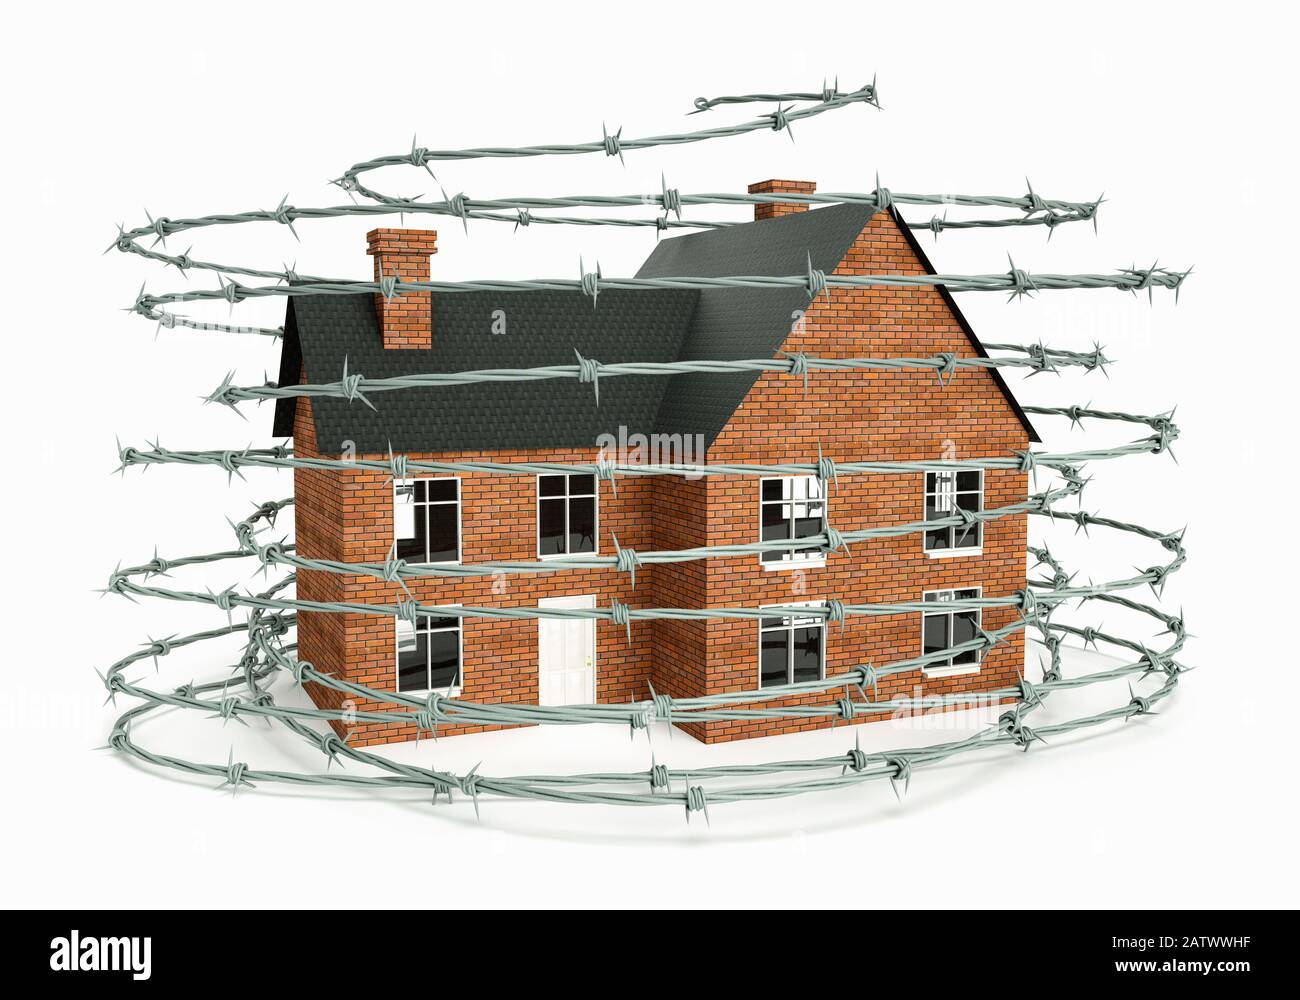 Home insurance or home security concept, a detached house wrapped in barbed wire Stock Photo